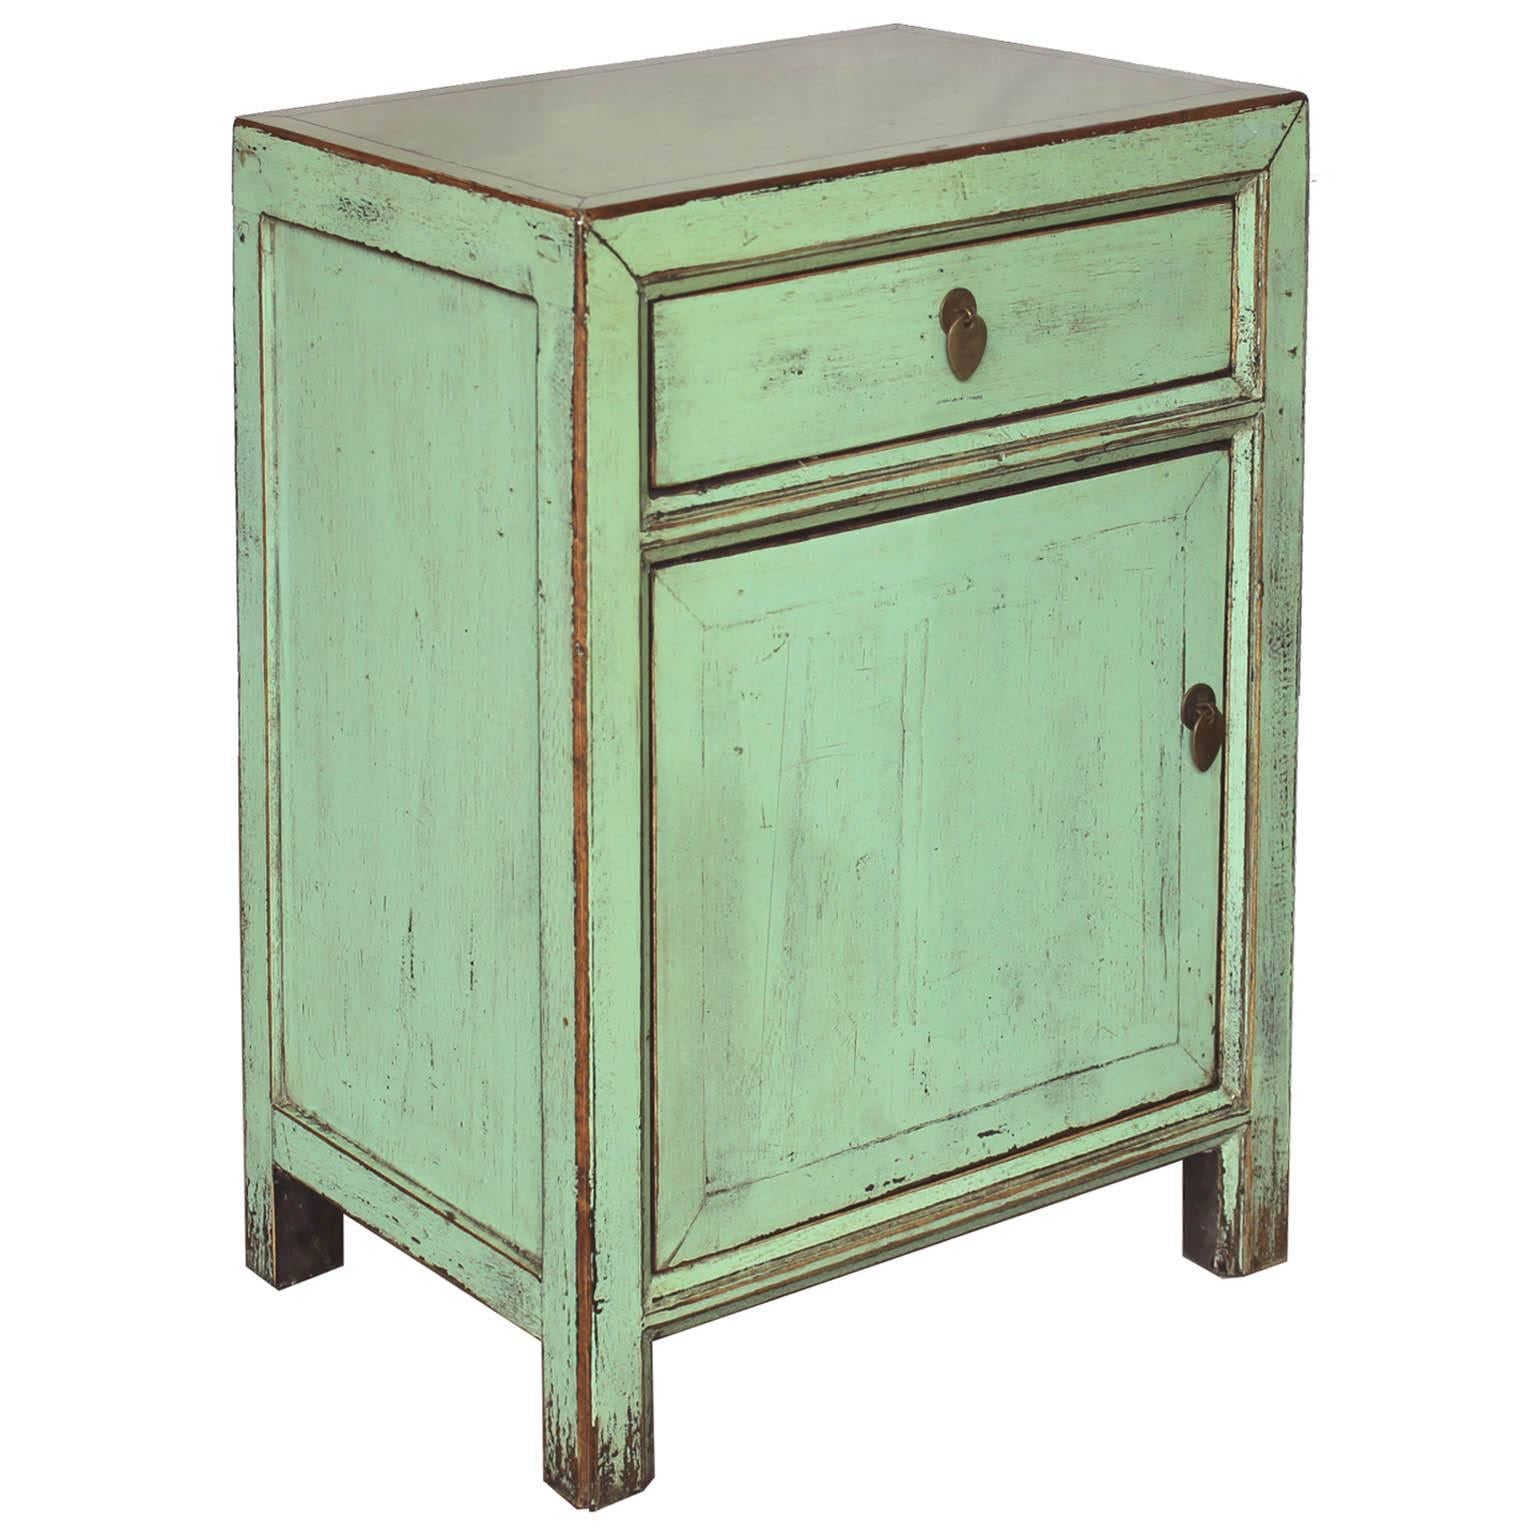 Contemporary one-drawer side chest with exposed wood edges and celadon lacquer finish will add a pop of color to a modern bedroom.  Chest shown on the left is no longer available.